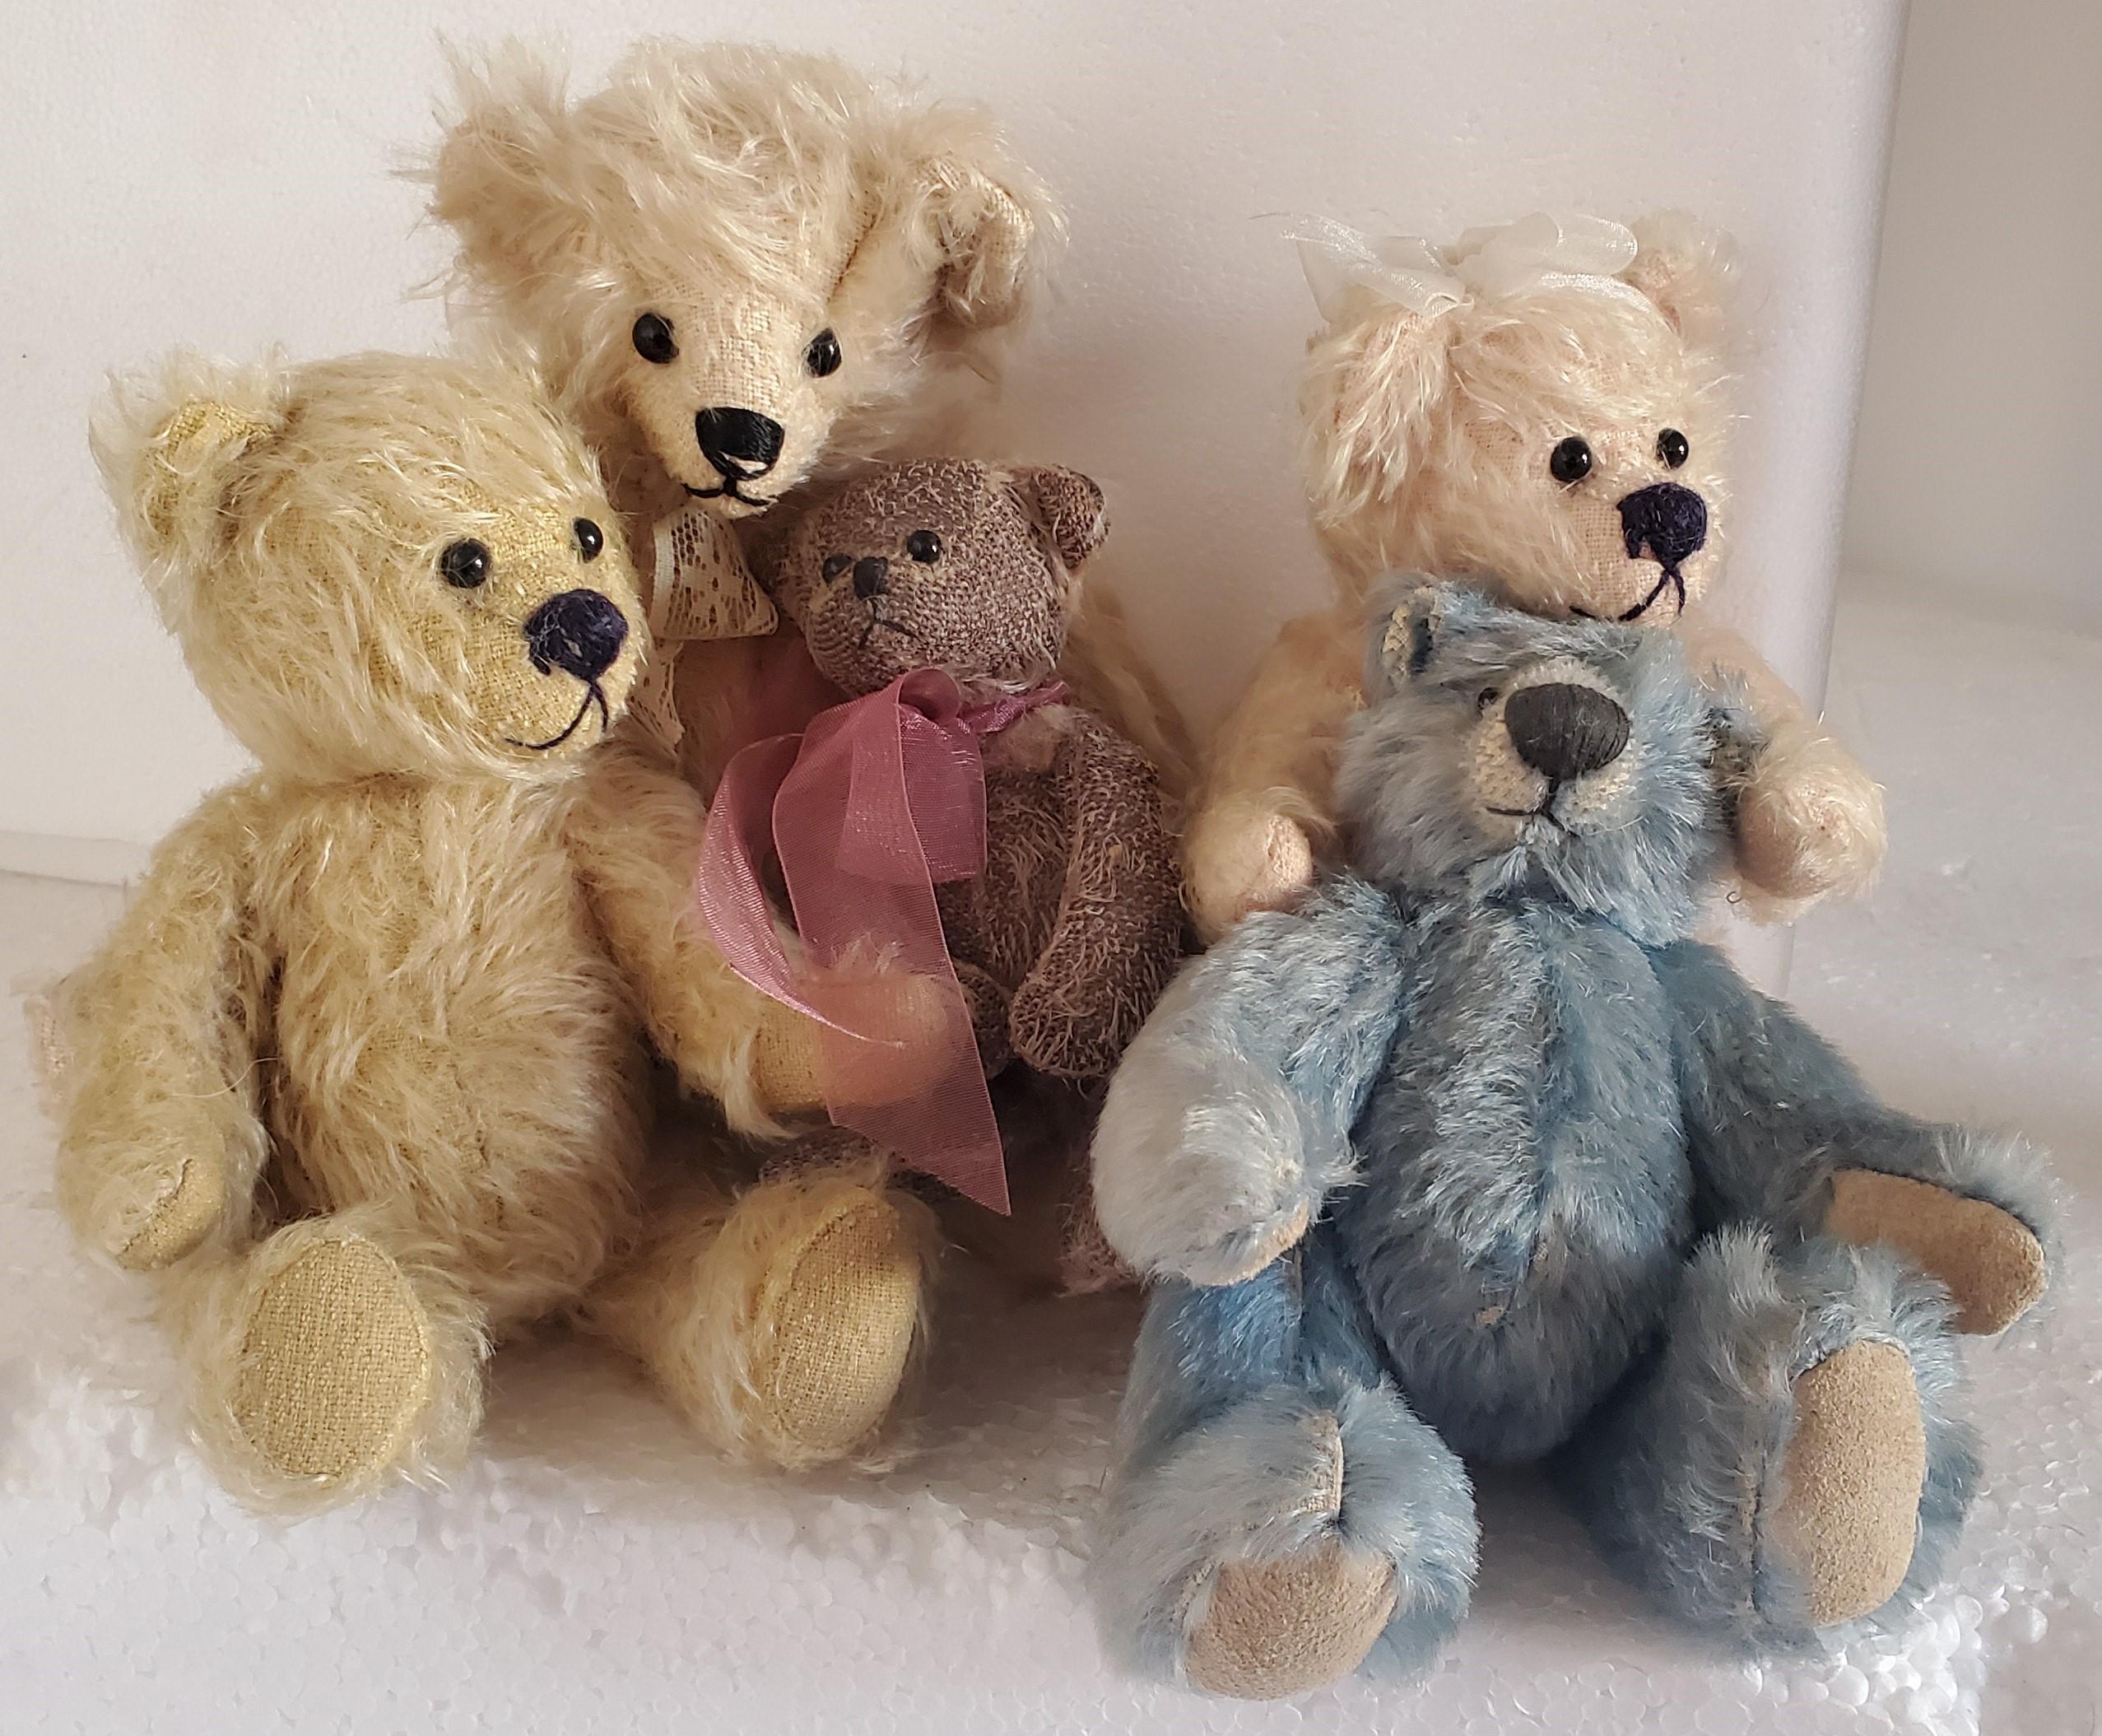 Collection of 5 contemporary bears. All bears are jointed and in great condition. Minor loss of fur to smallest bear. 

Largest bears measures:
9 high x 5 wide
Smallest bear measures:
7 high x 2 wide.